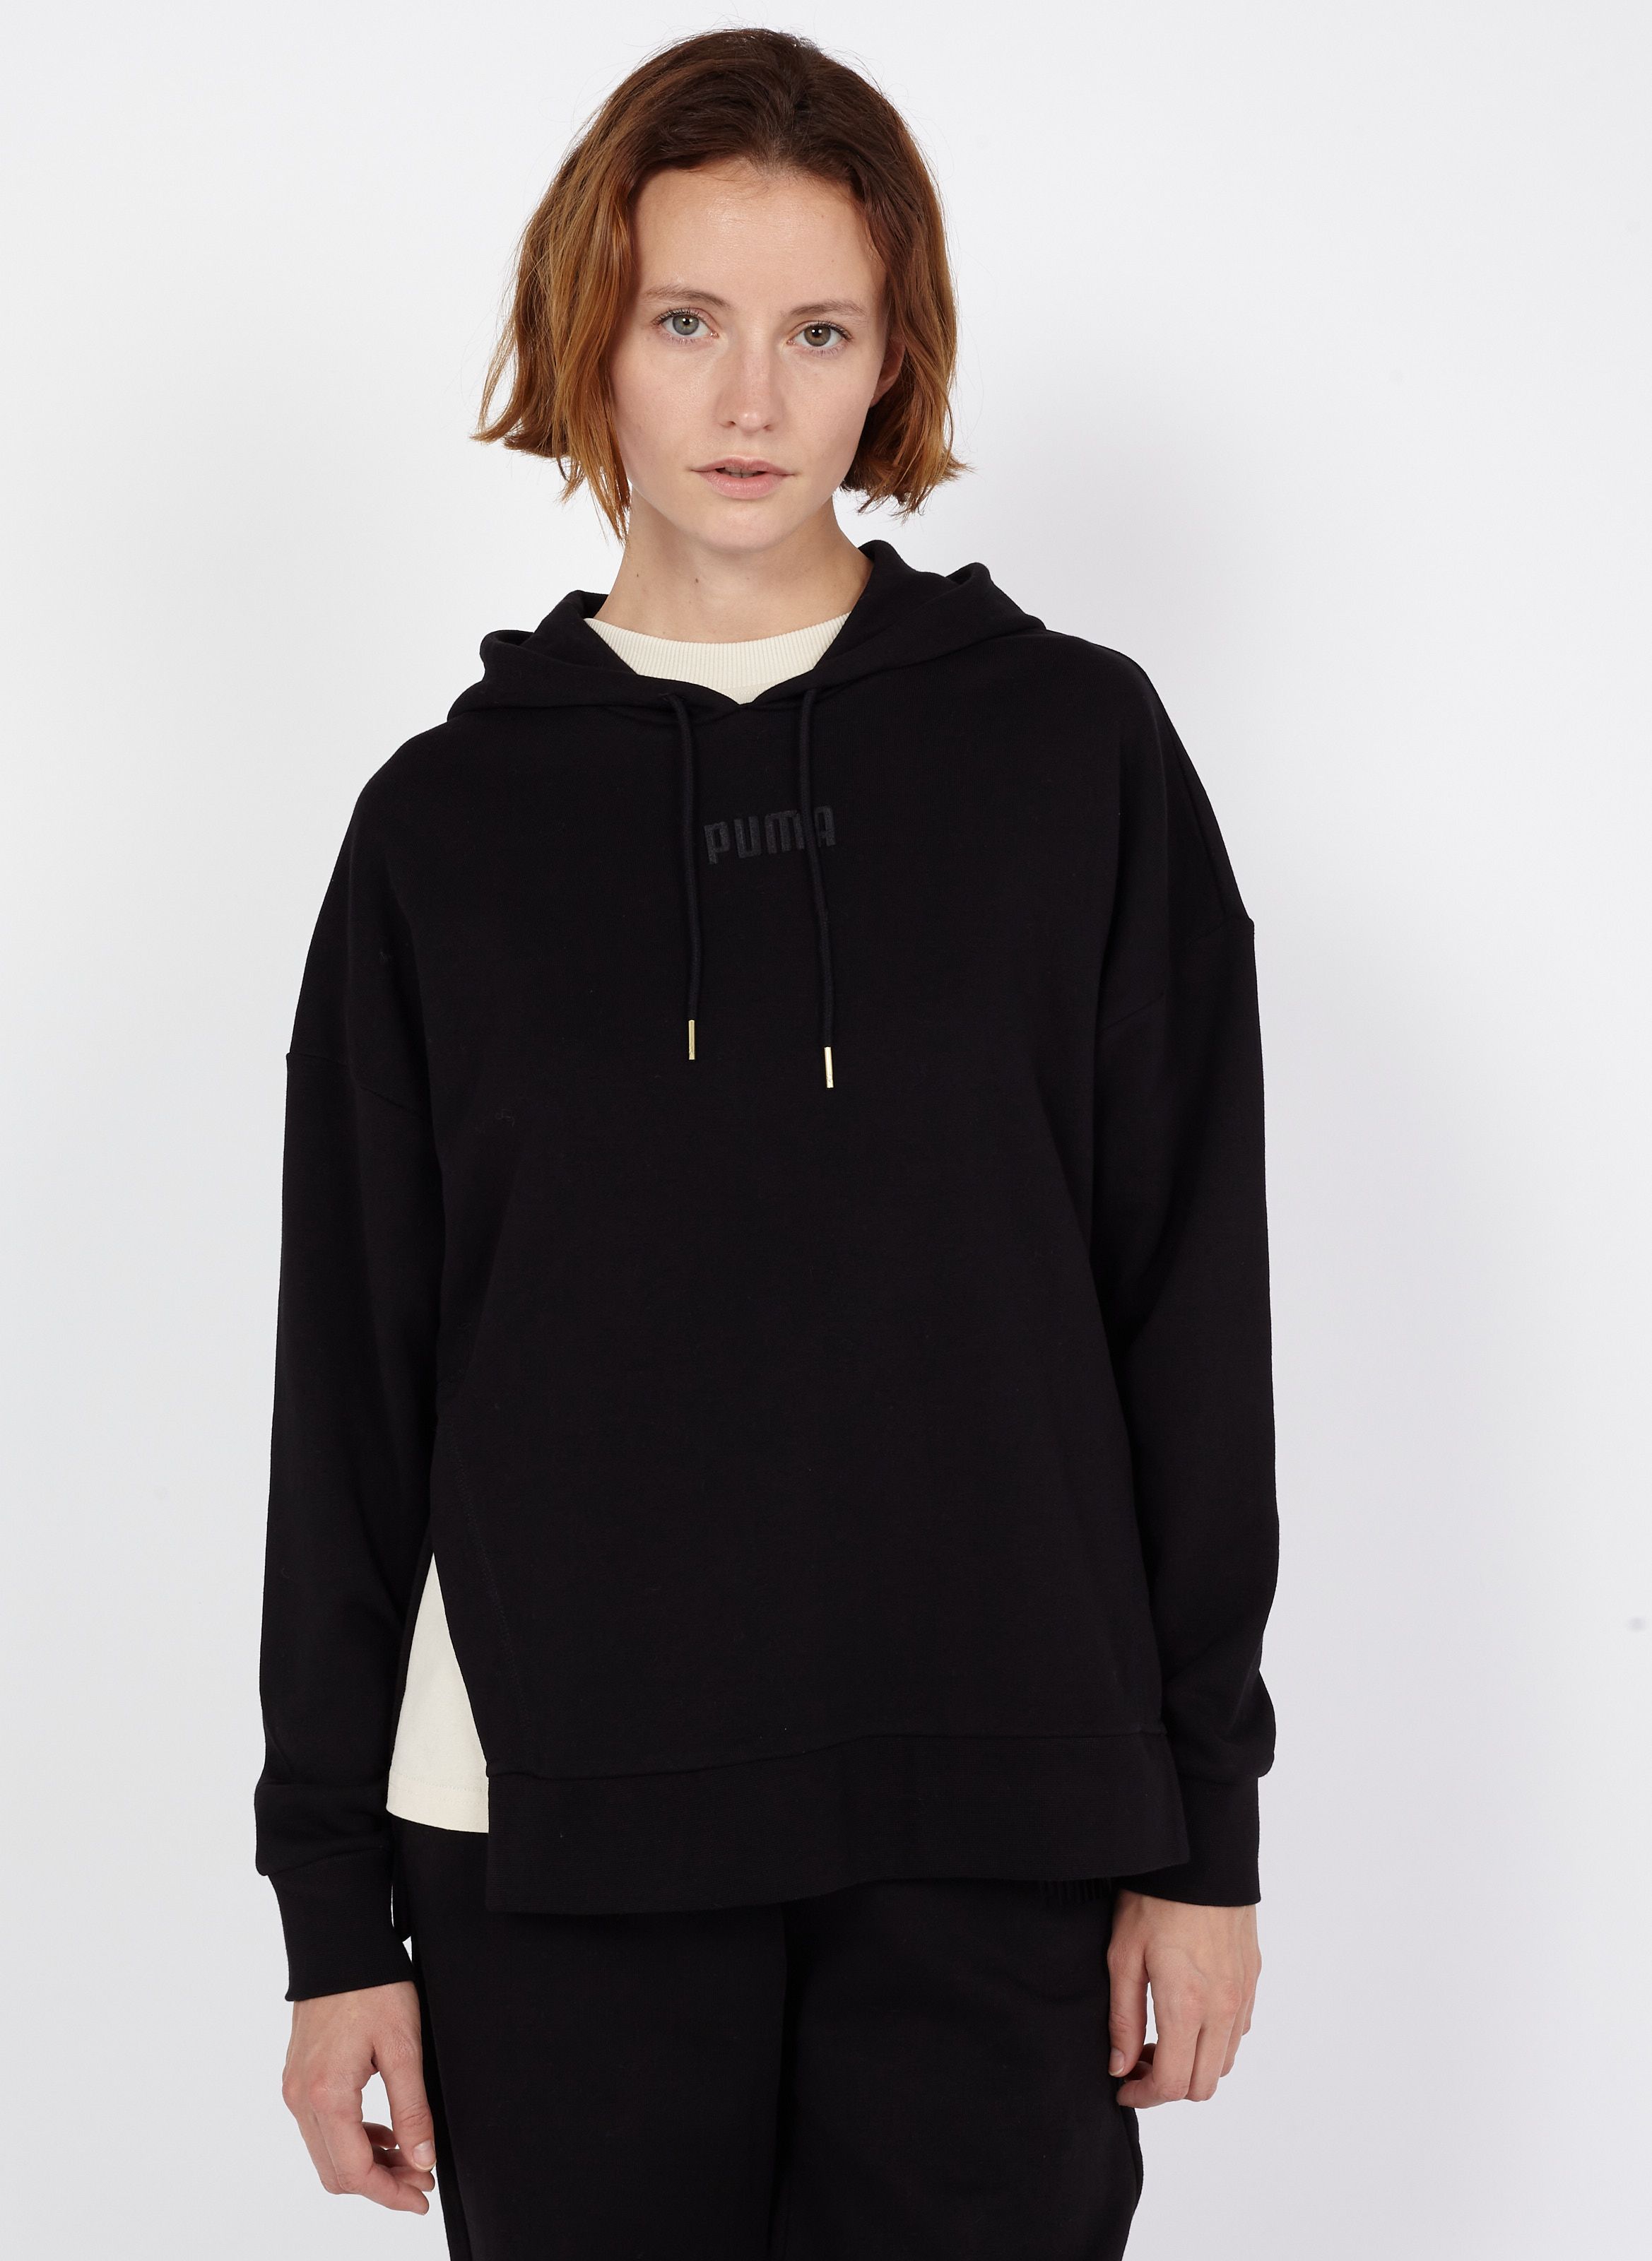 puma pullovers online shopping